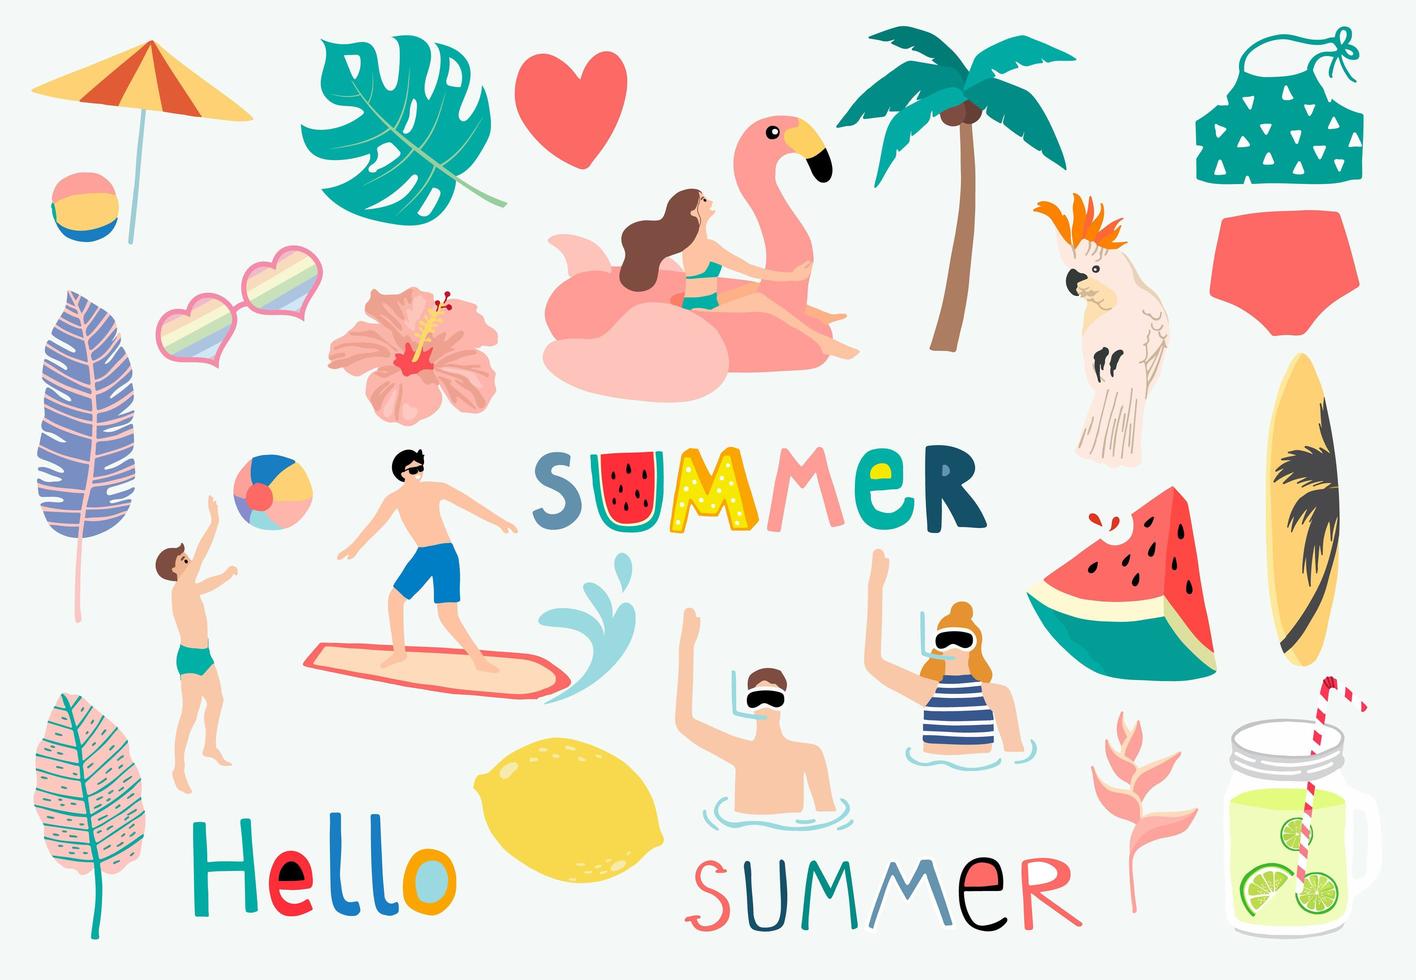 Summer objects including watermelon, lemon, float and surfboard vector